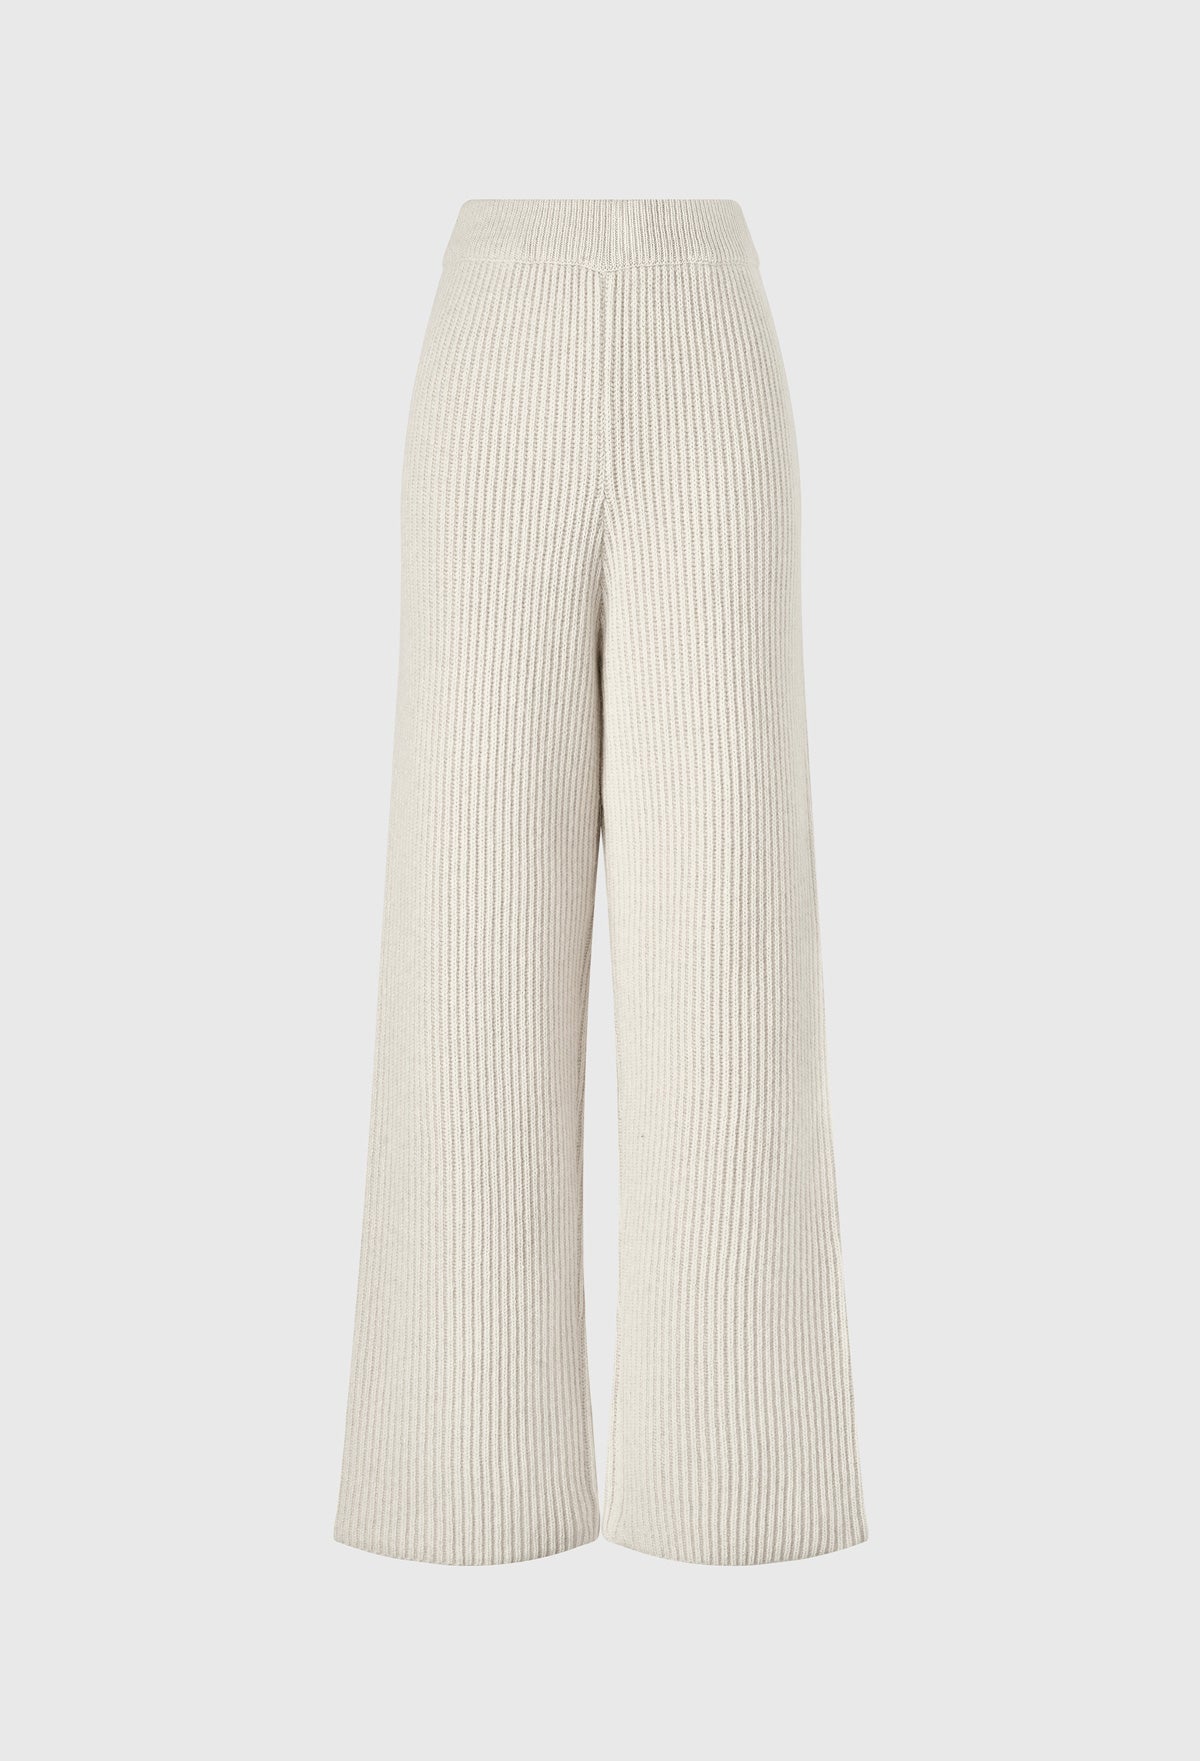 Bulky Knitted Pants In Cream Beige